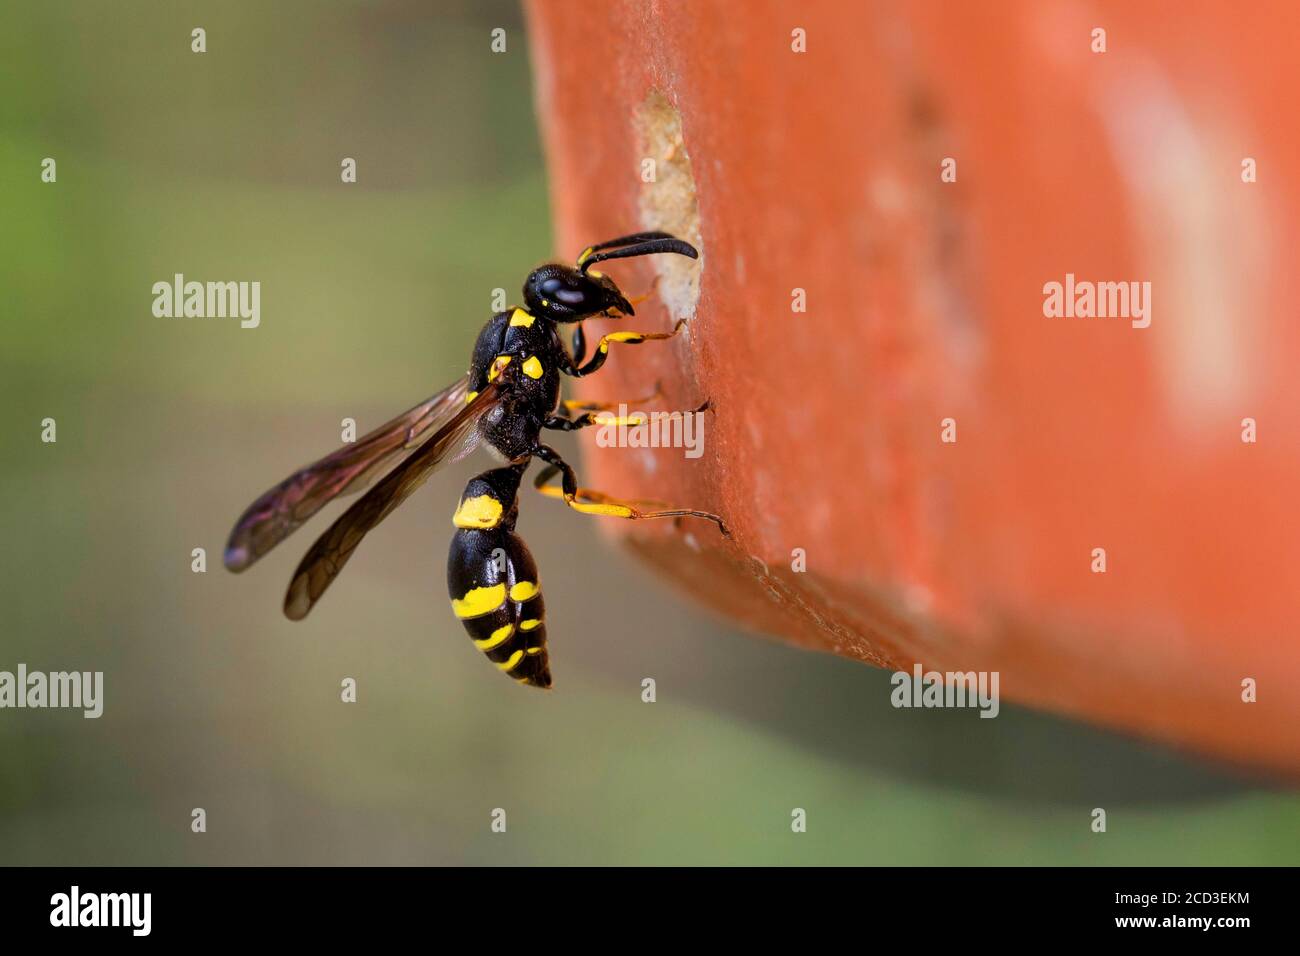 Mason wasp, potter wasp (Symmorphus crassicornis), female at the nesting hole in a brick of an insect hotel, Germany Stock Photo